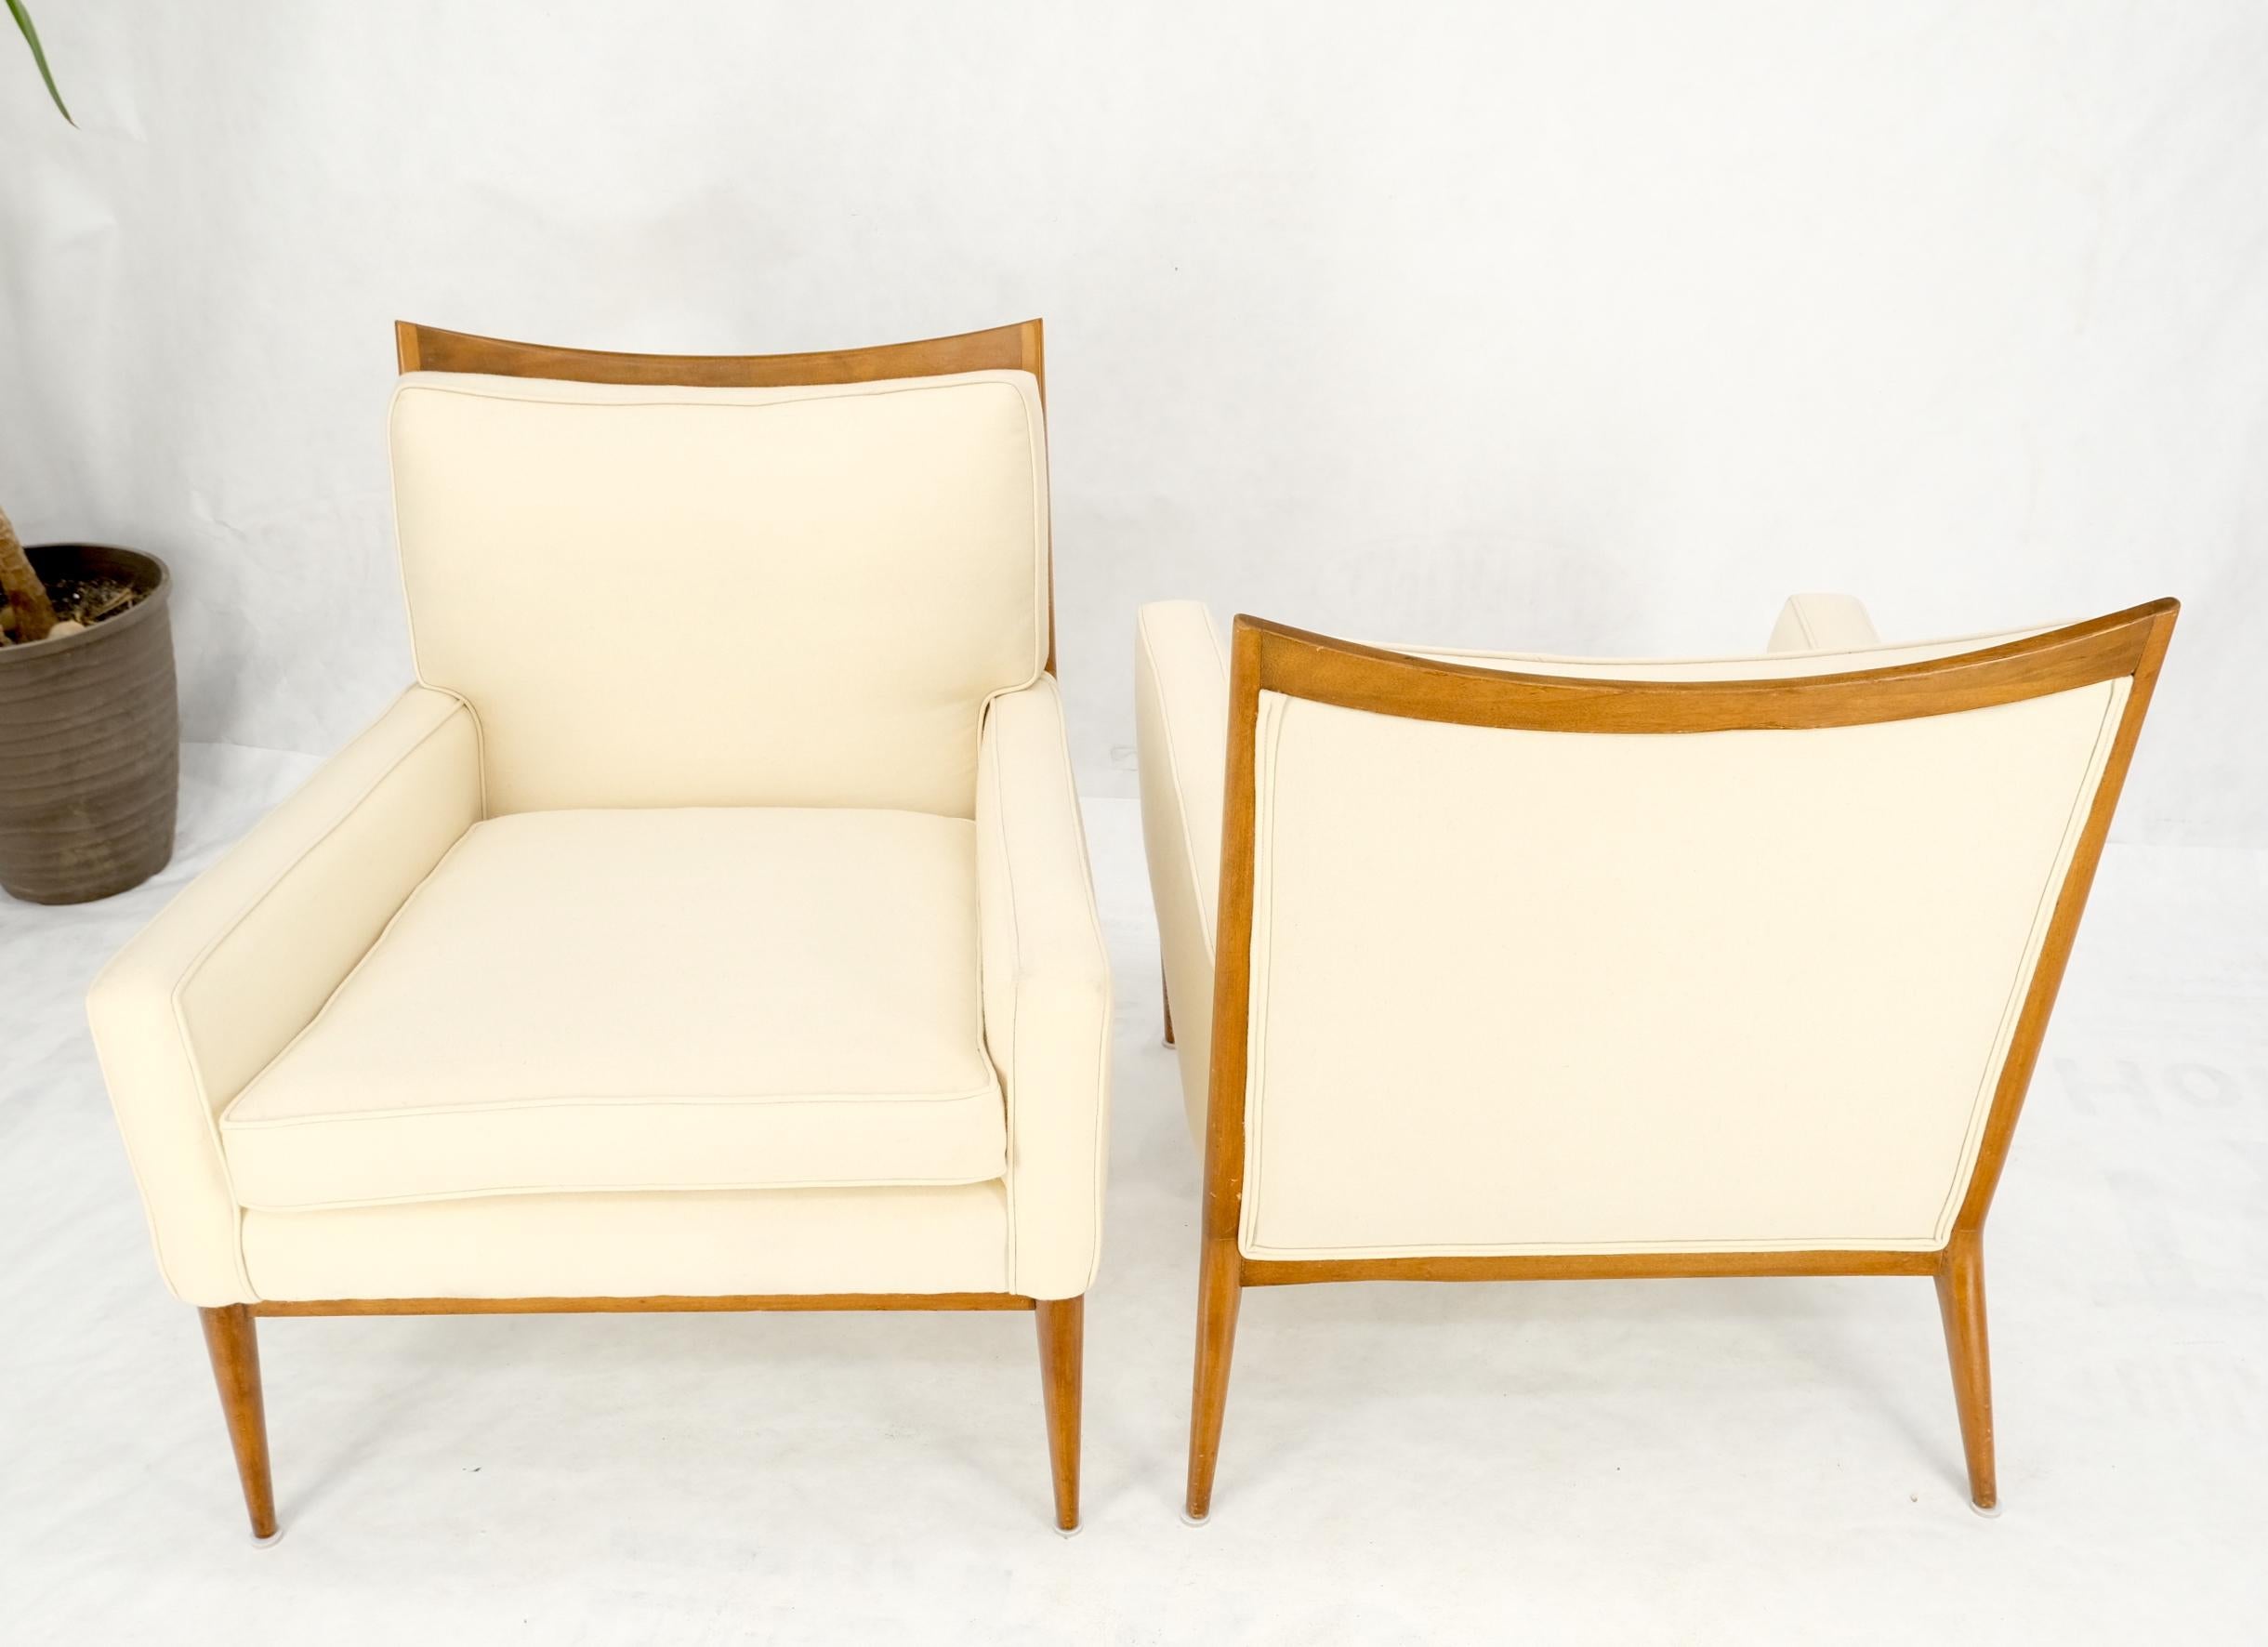 Pair of Mid Century Modern McCobb Chairs Newly Upholstered in Cream Virgin Wool For Sale 13